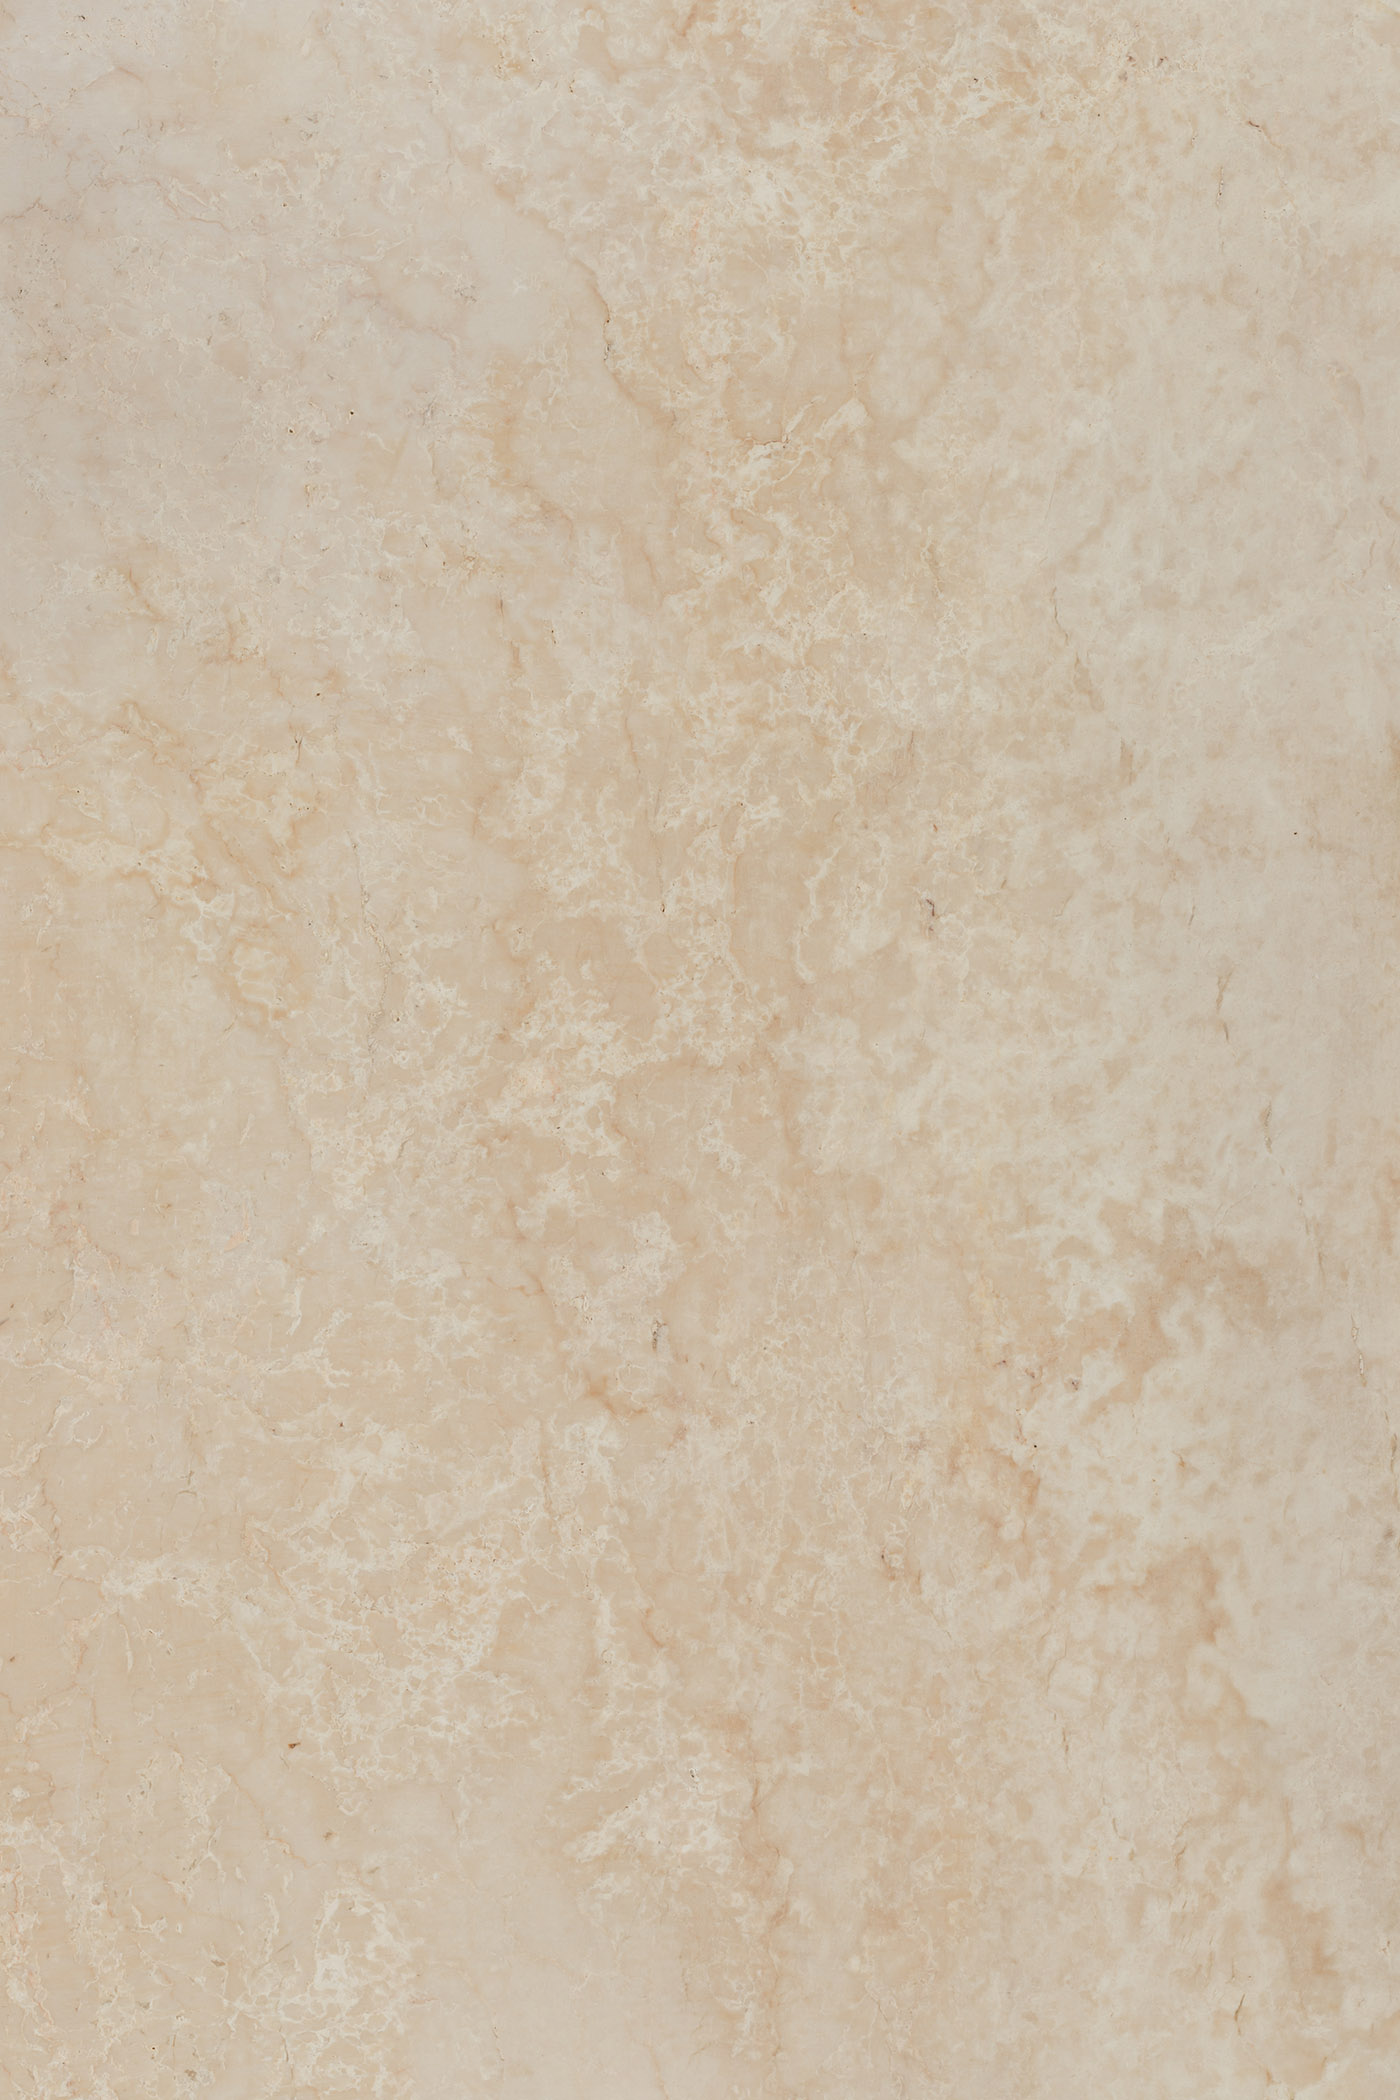 Beige marble photography backdrop originally photographed in Italy